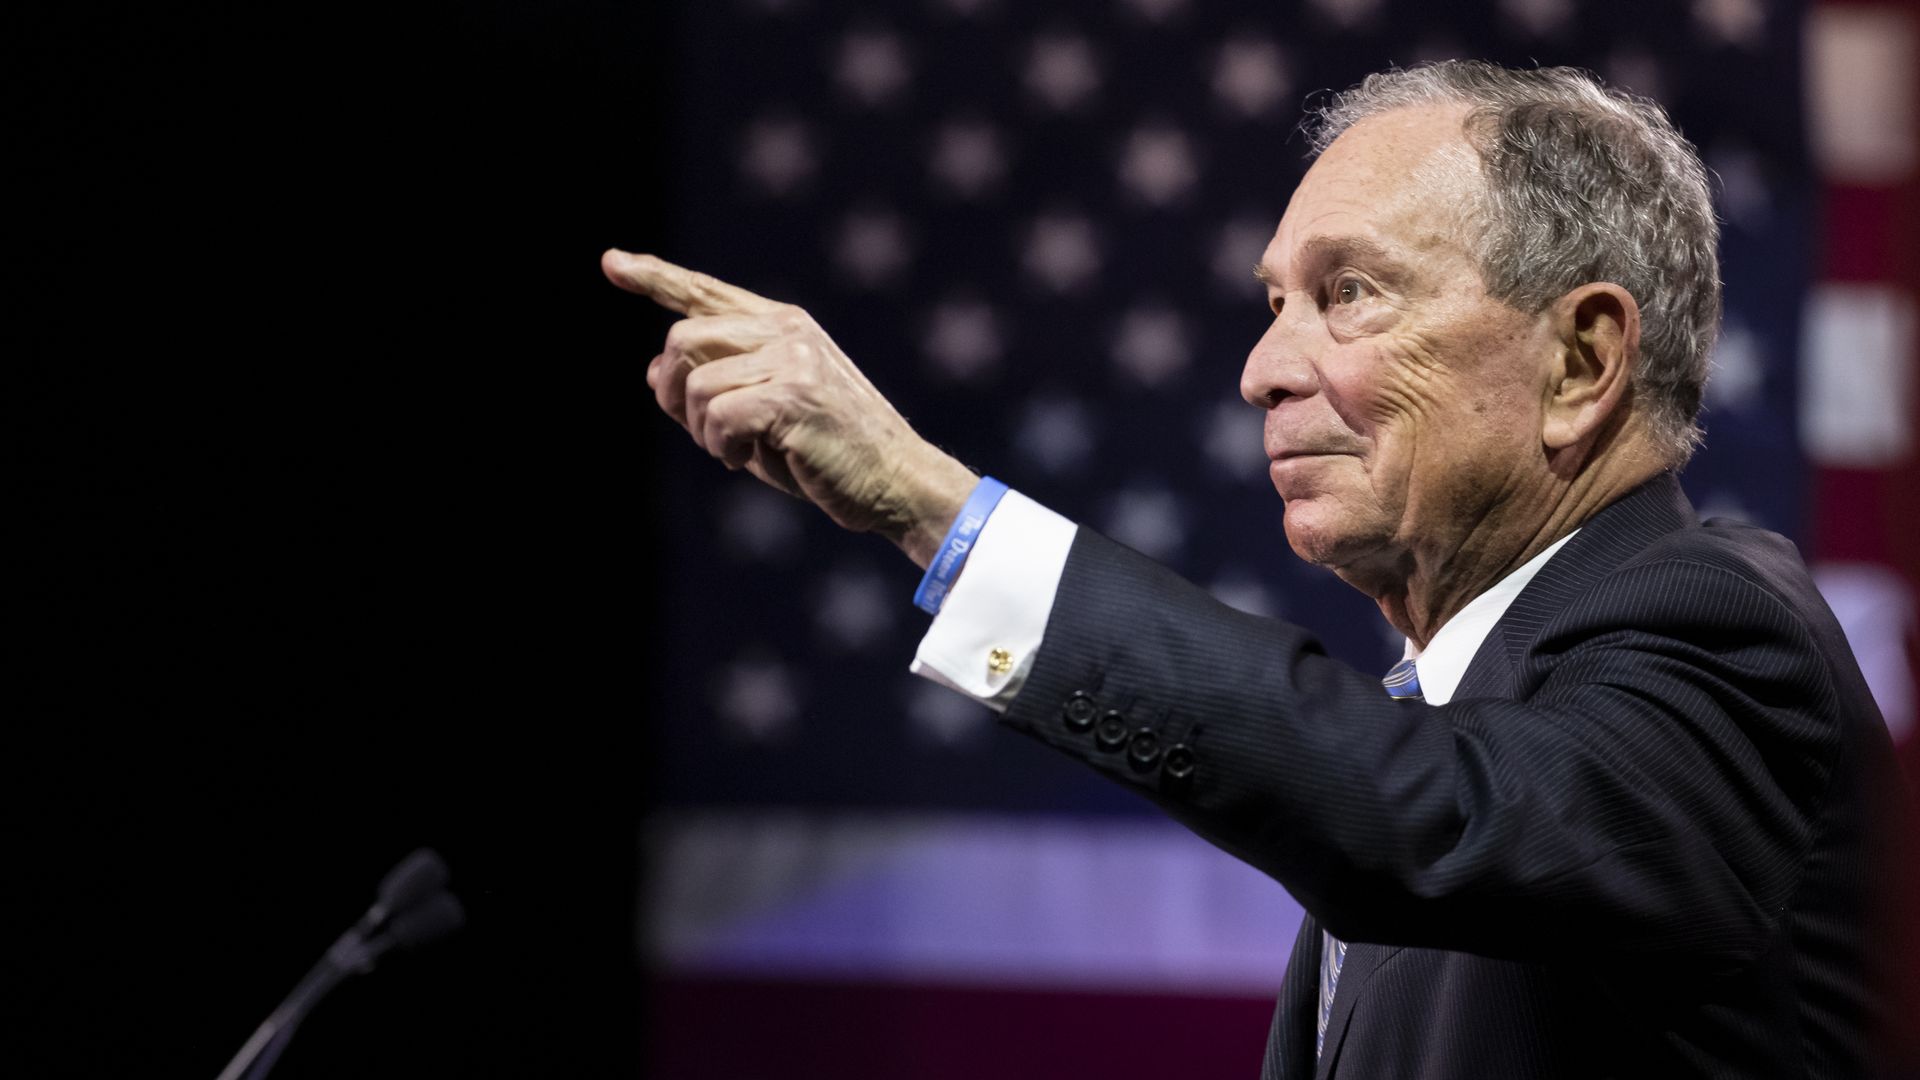  Democratic presidential candidate former New York City Mayor Mike Bloomberg delivers remarks during a campaign rally on February 12, 2020 in Nashville, Tennessee. 